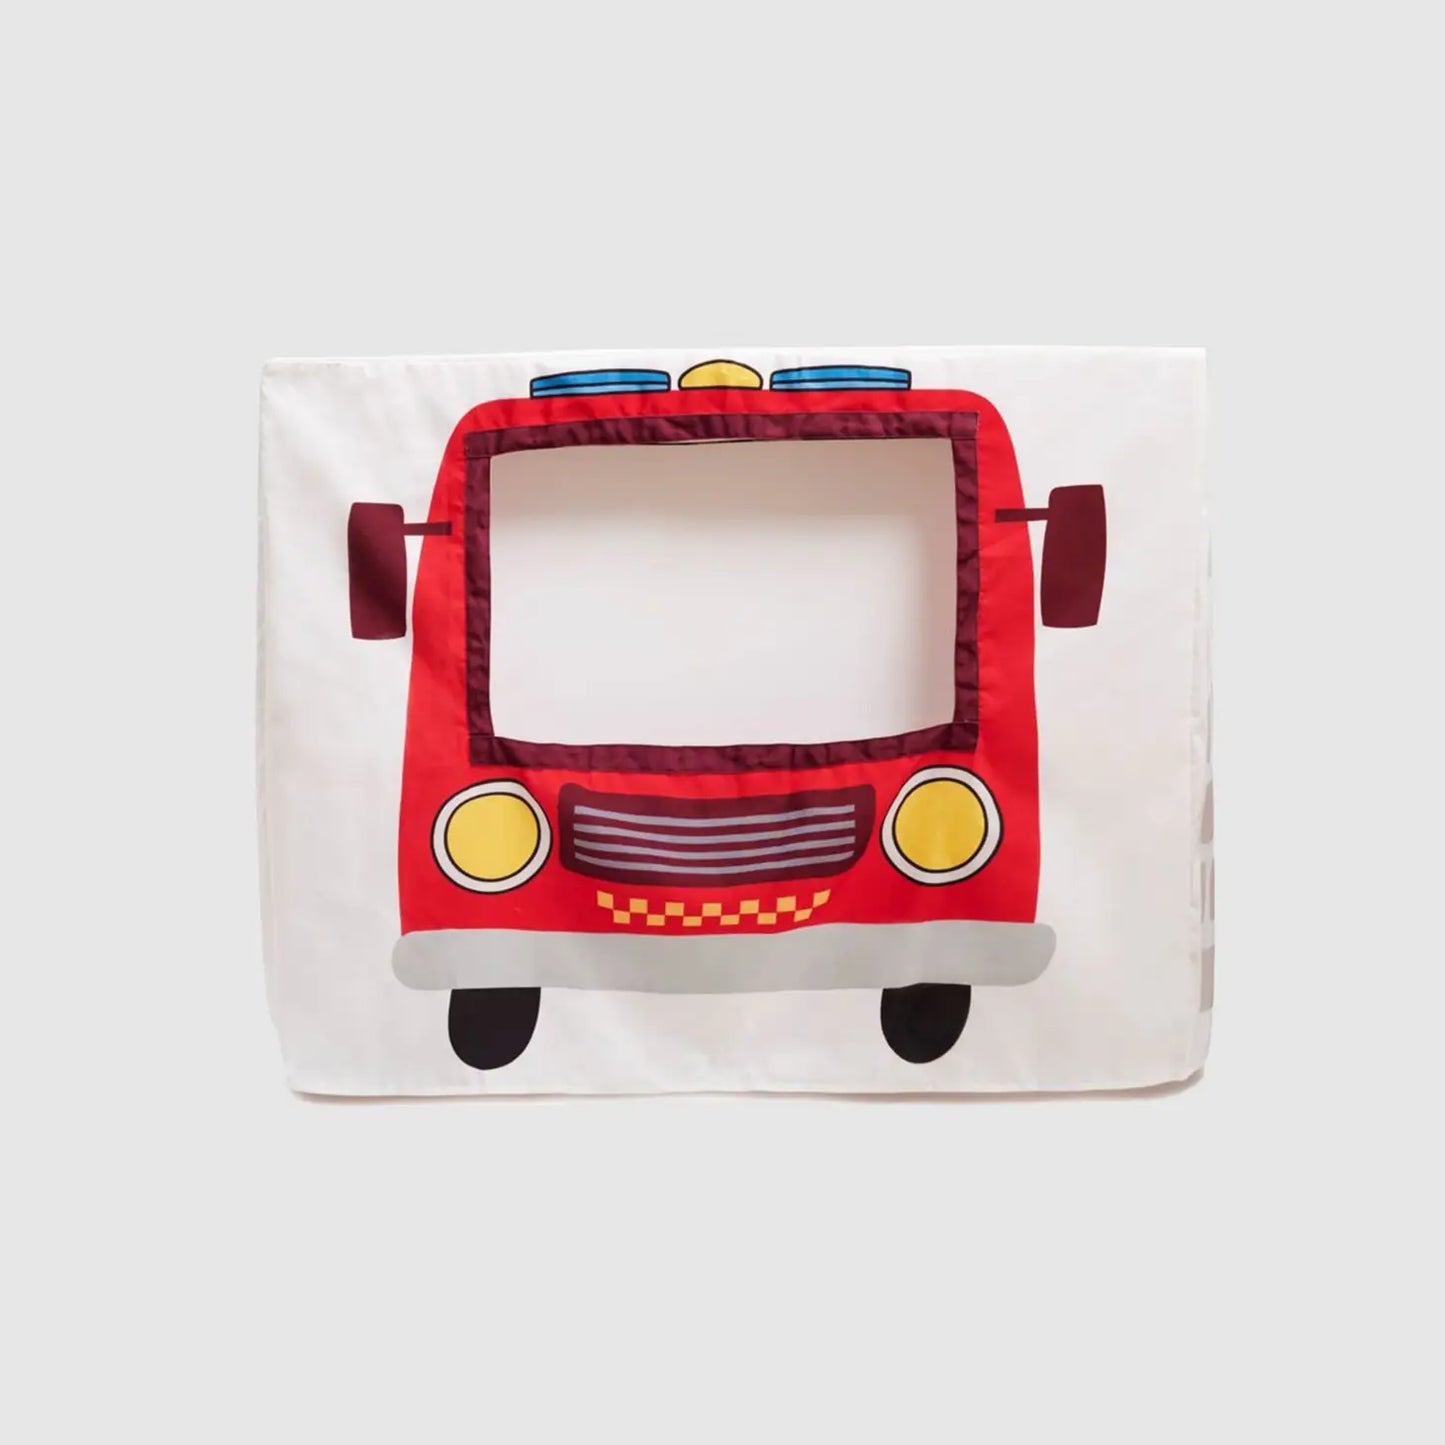 Table Tent Cubby - Fire Truck and Station